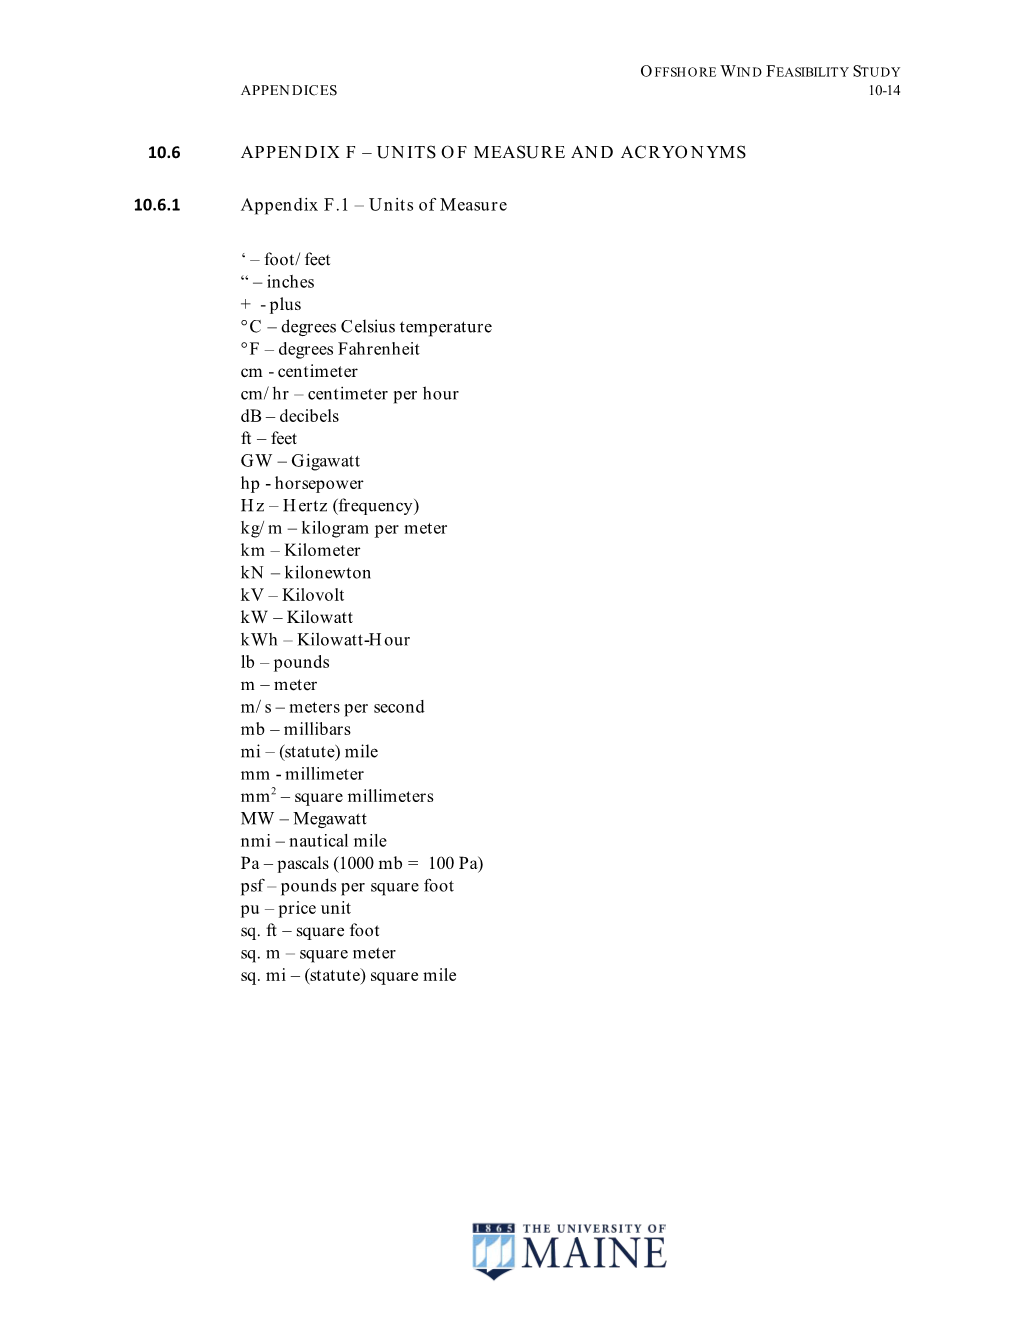 10.6 Appendix F – Units of Measure and Acryonyms 10.6